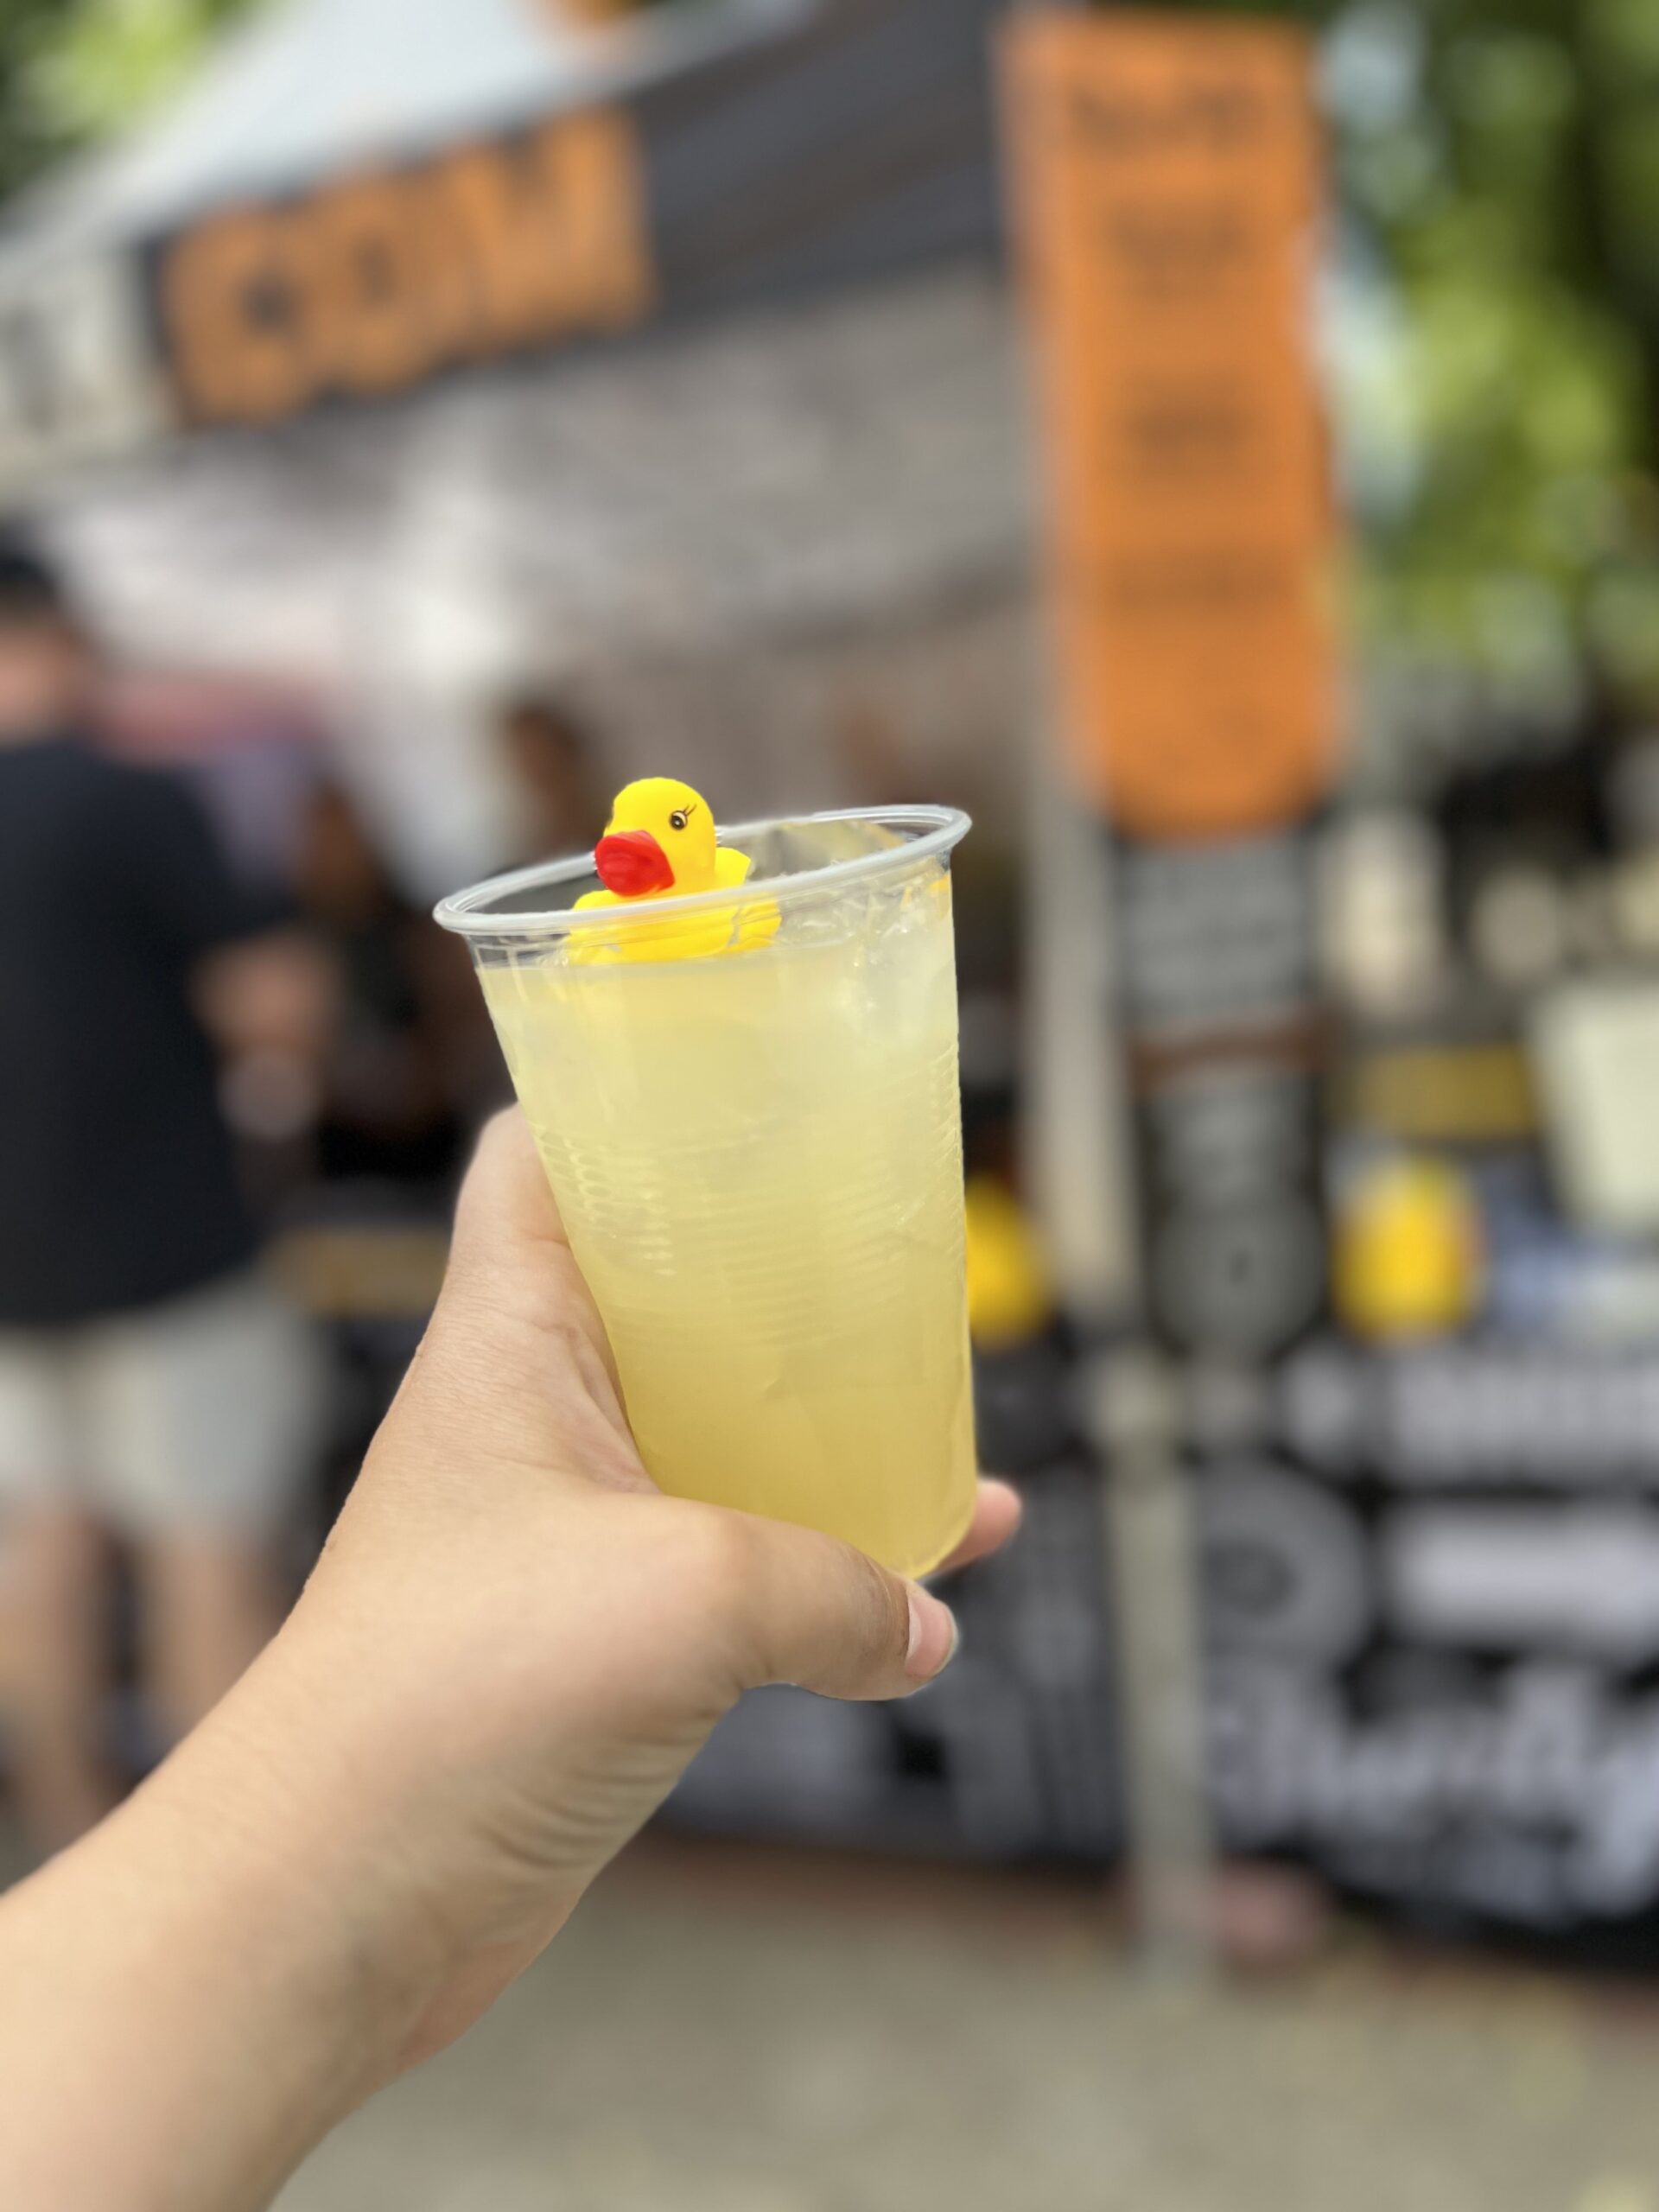 A photo of someone holding a drink with a yellow rubber duck in it.